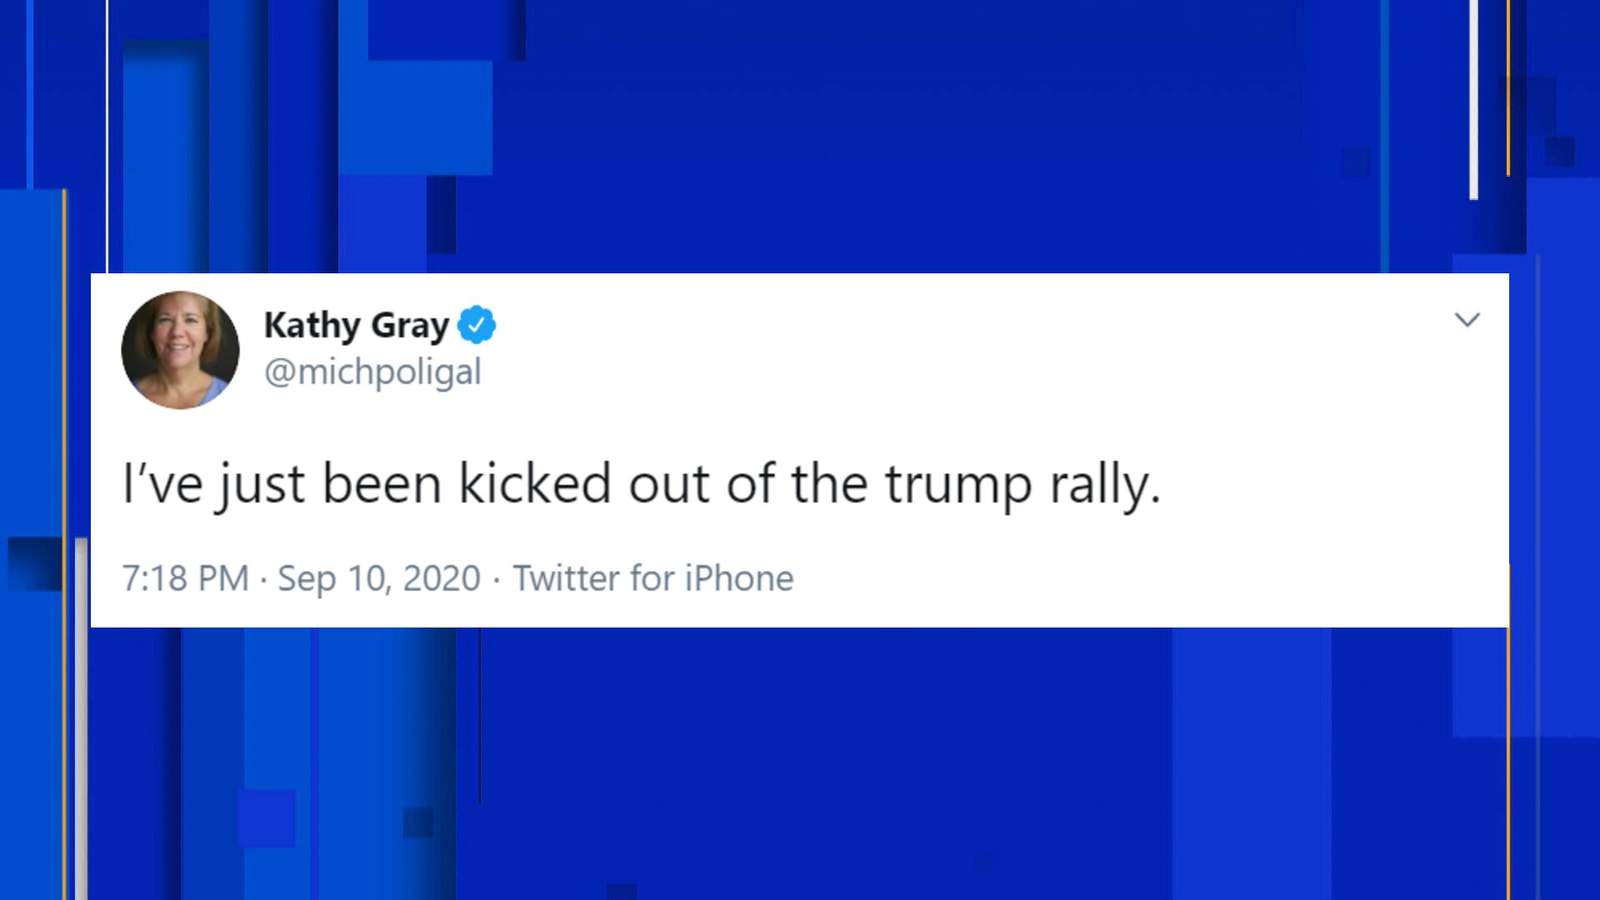 New York Times correspondent Kathy Gray says Trump campaign removed her from Michigan rally